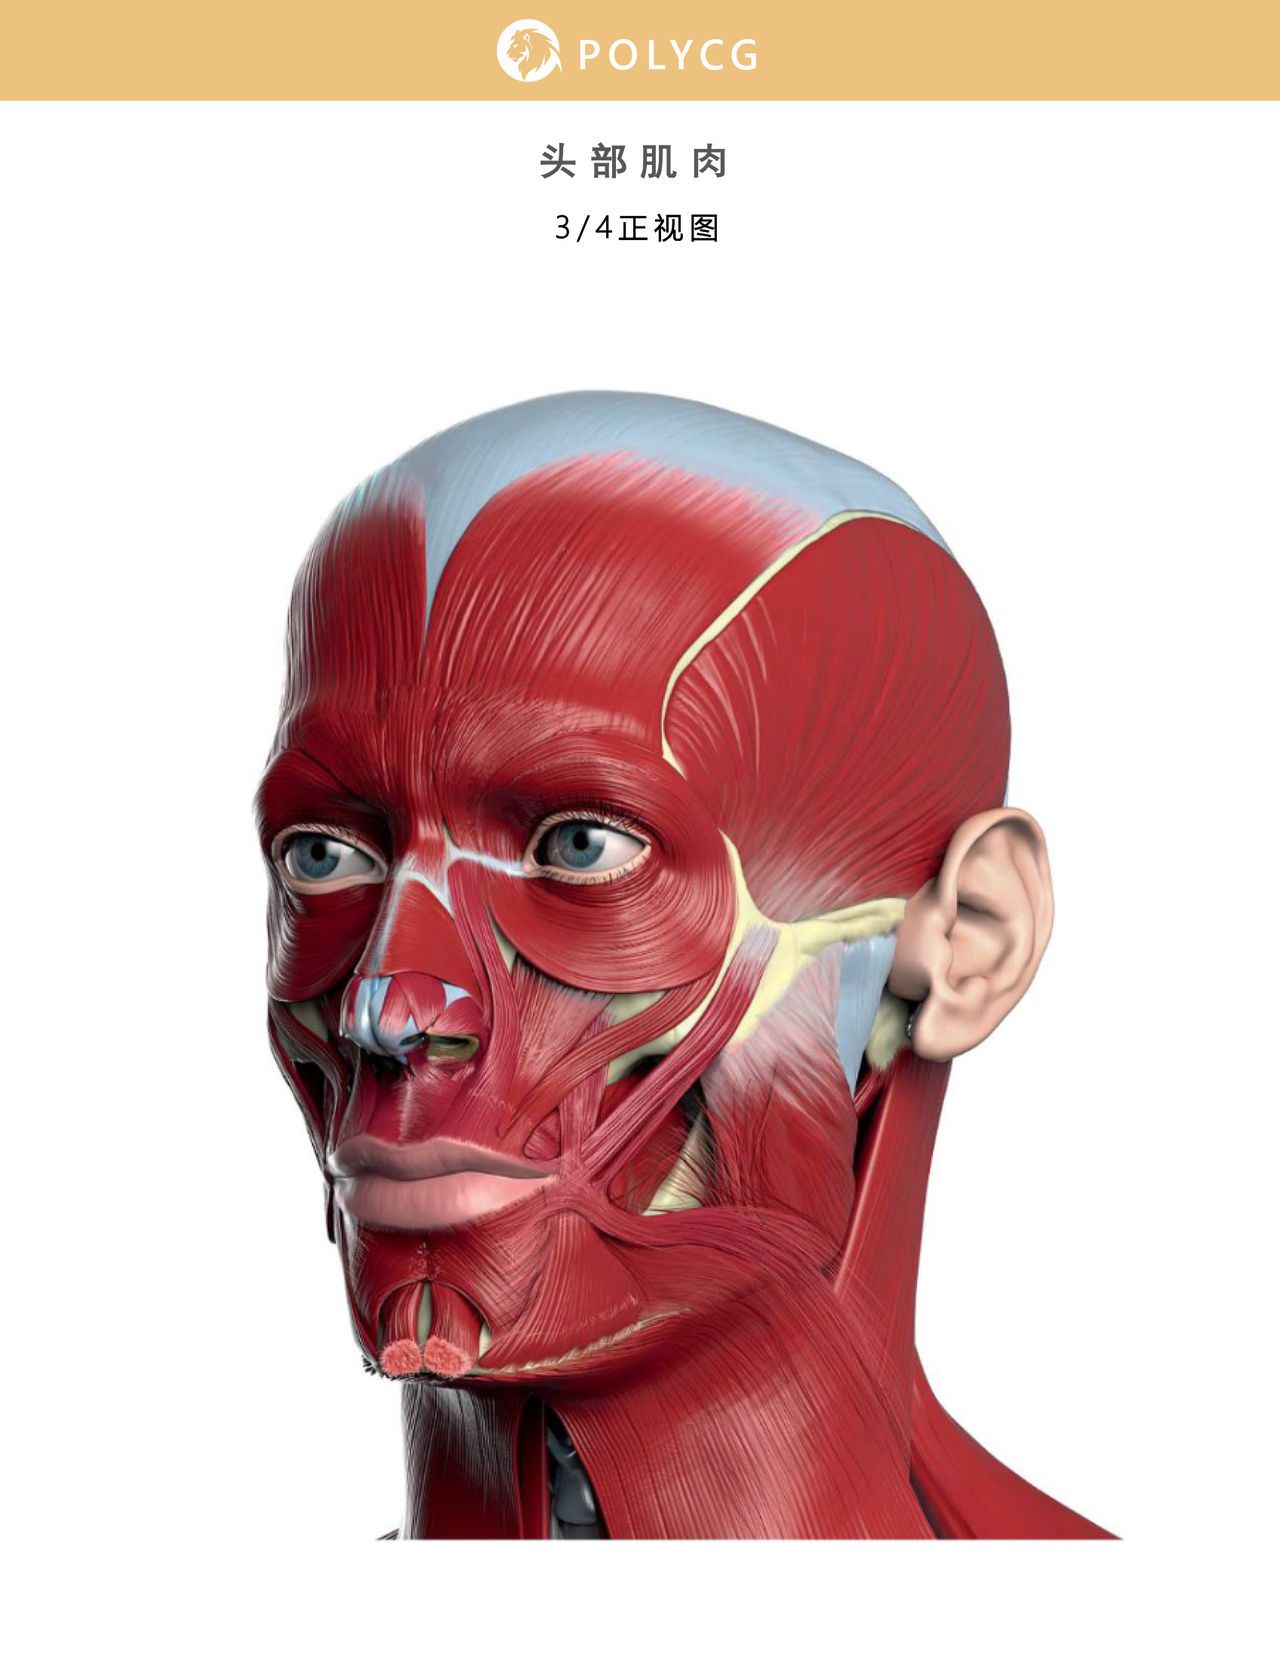 Uldis Zarins-Anatomy of Facial Expression-Exonicus [Chinese] 面部表情艺用解剖 [中文版] 39